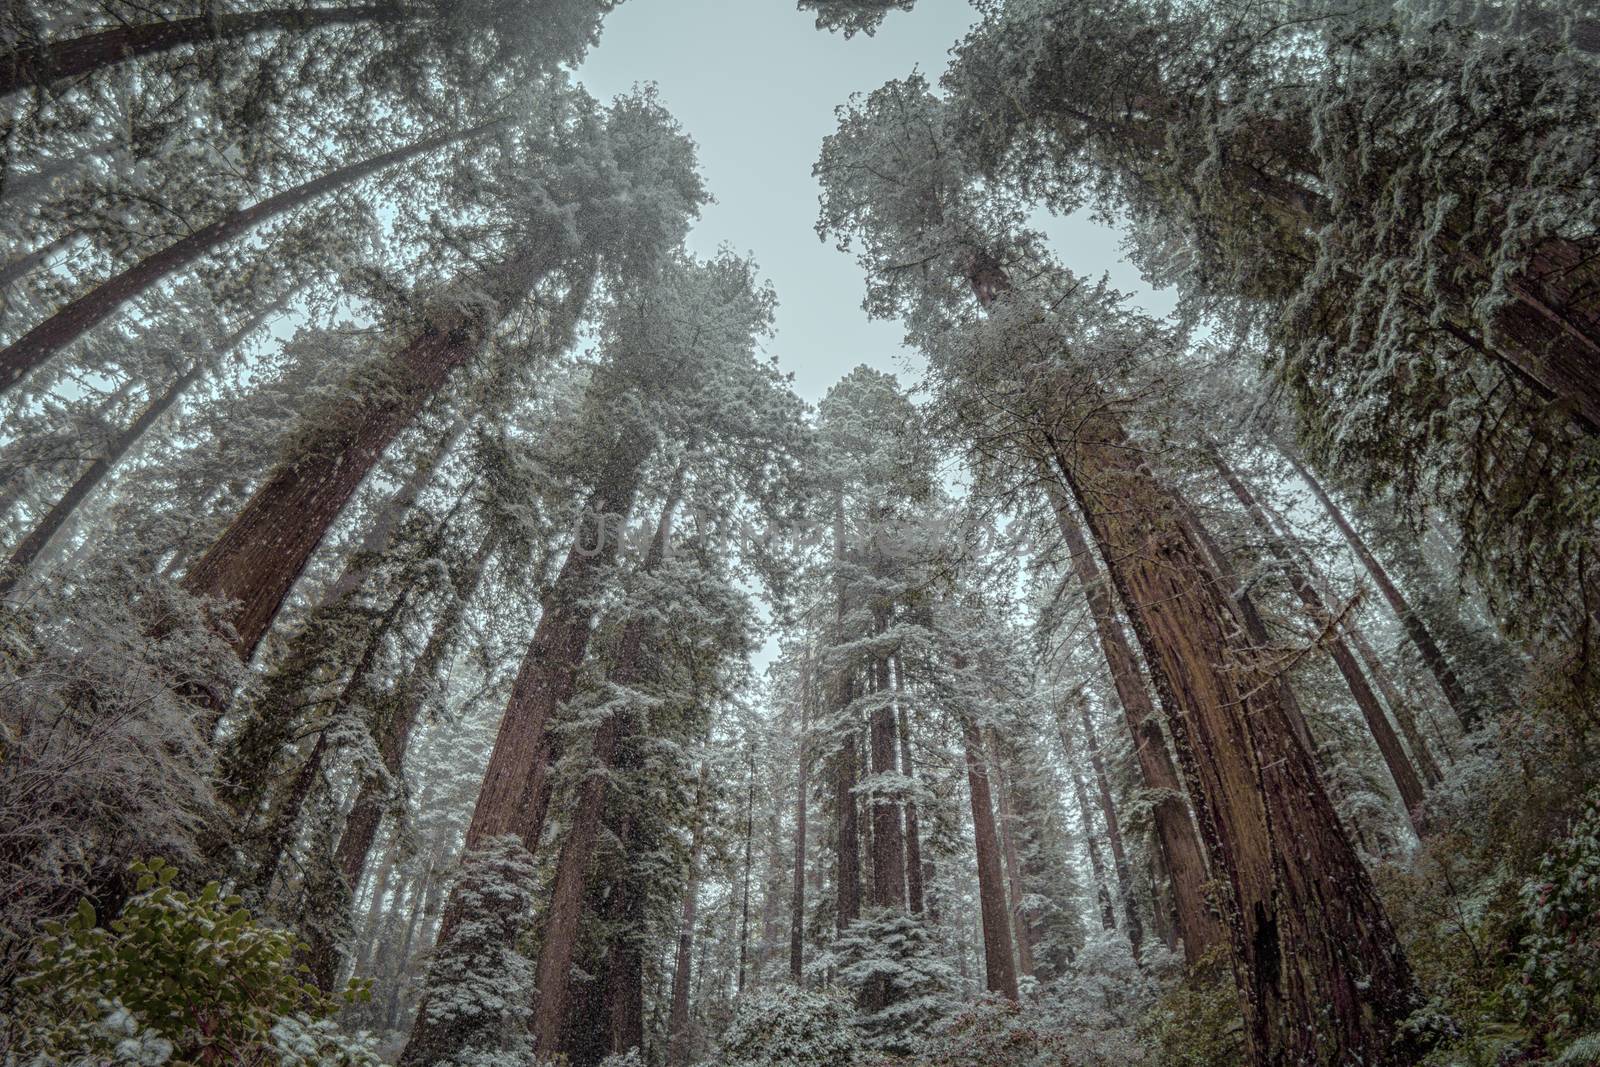 Color image of a redwood forest during a light snowfall. Northern California, USA.